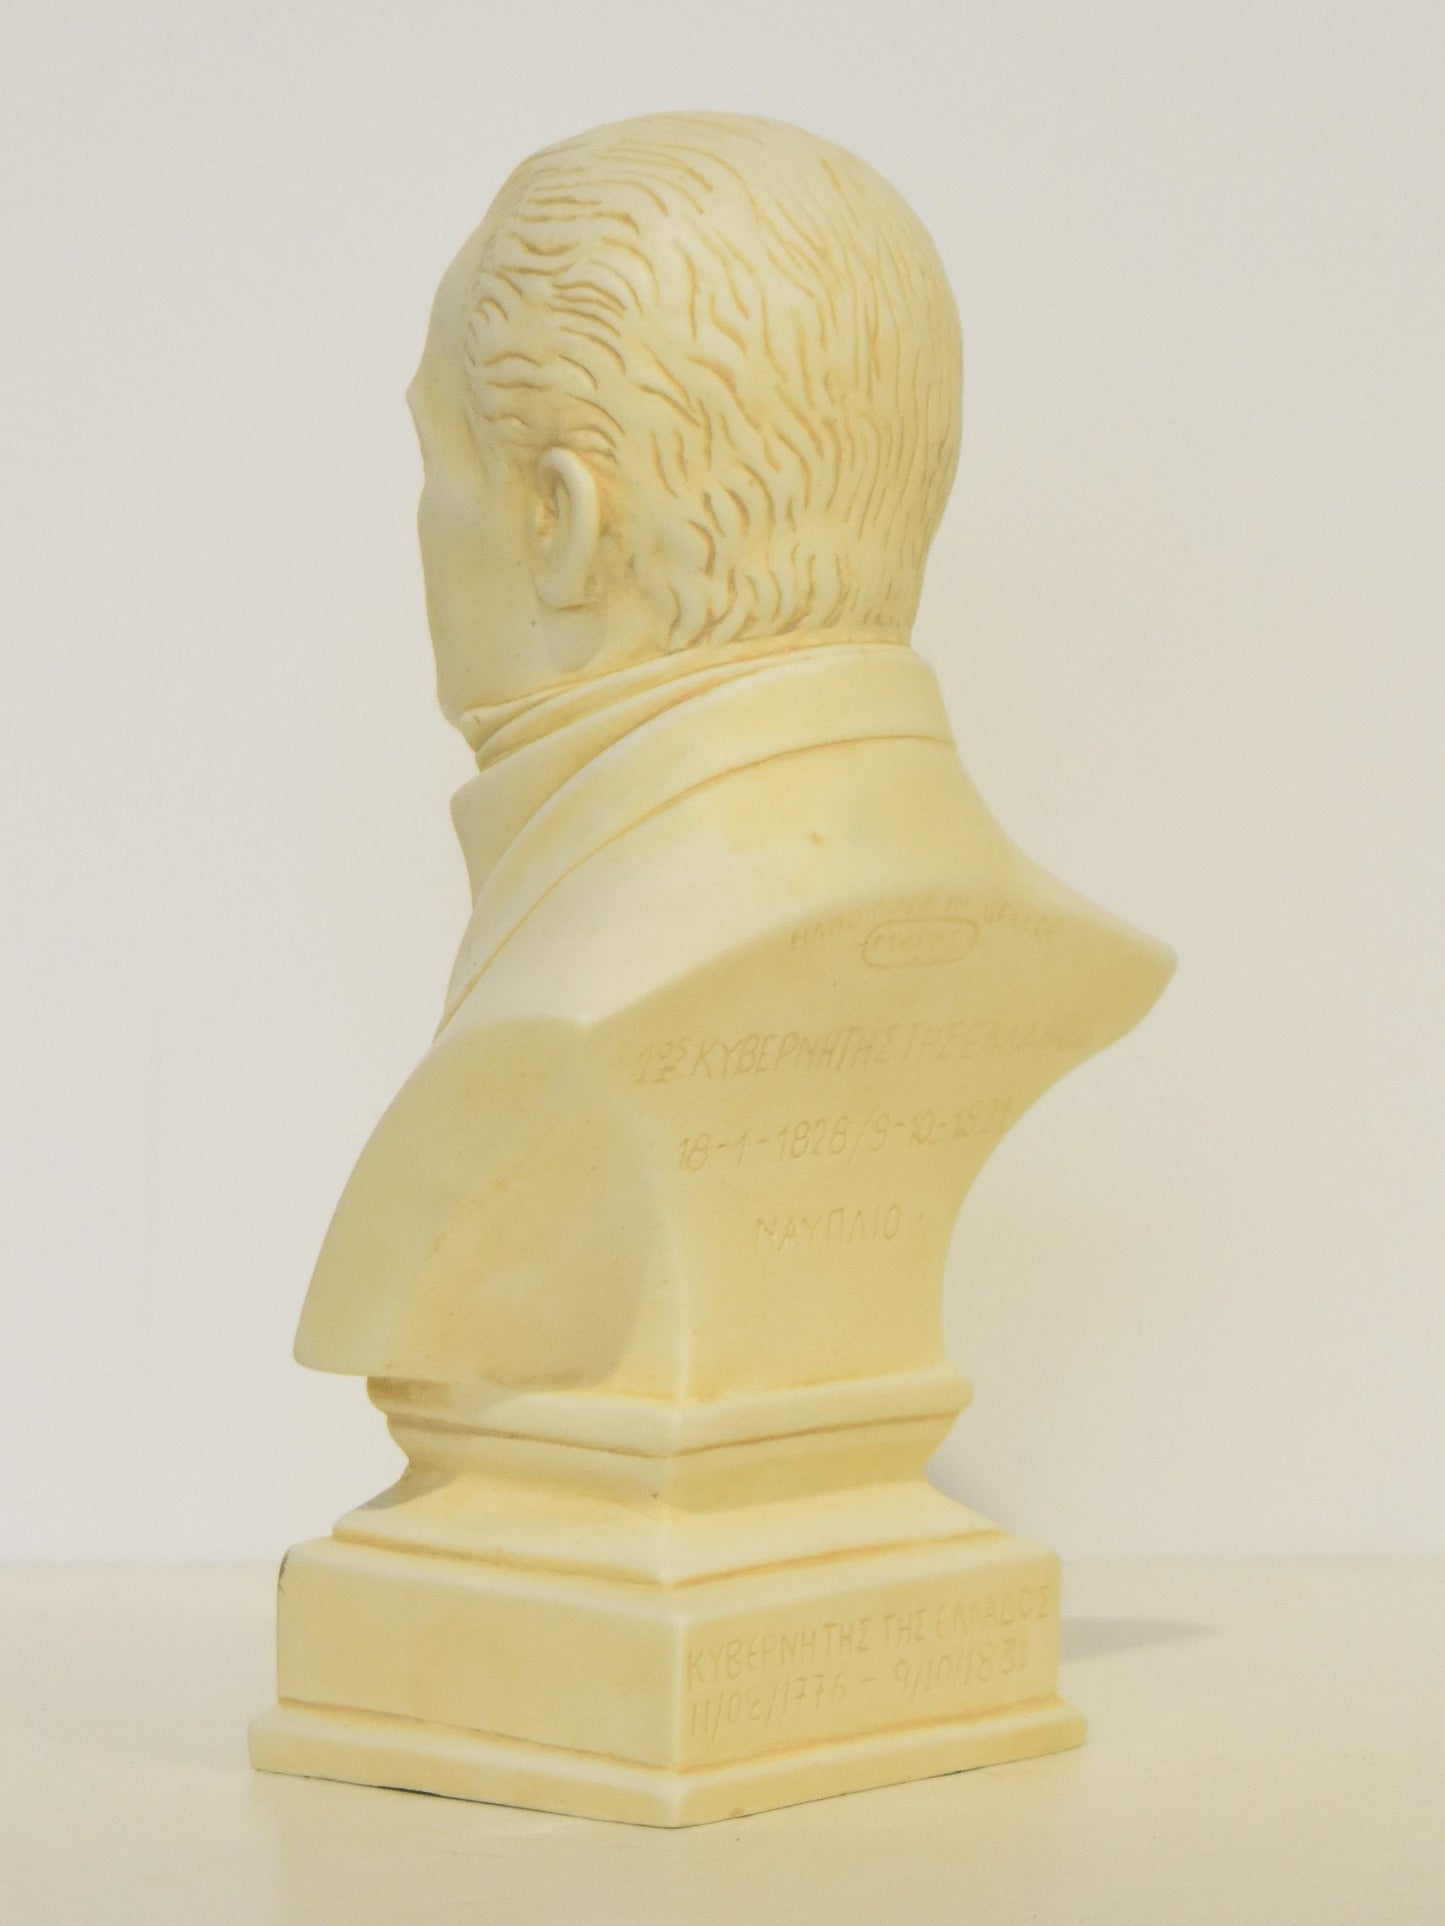 Ioannis Kapodistrias - Head Bust - Greek Statesman - One of the most distinguished Politicians and Diplomats in Europe - Casting Stone